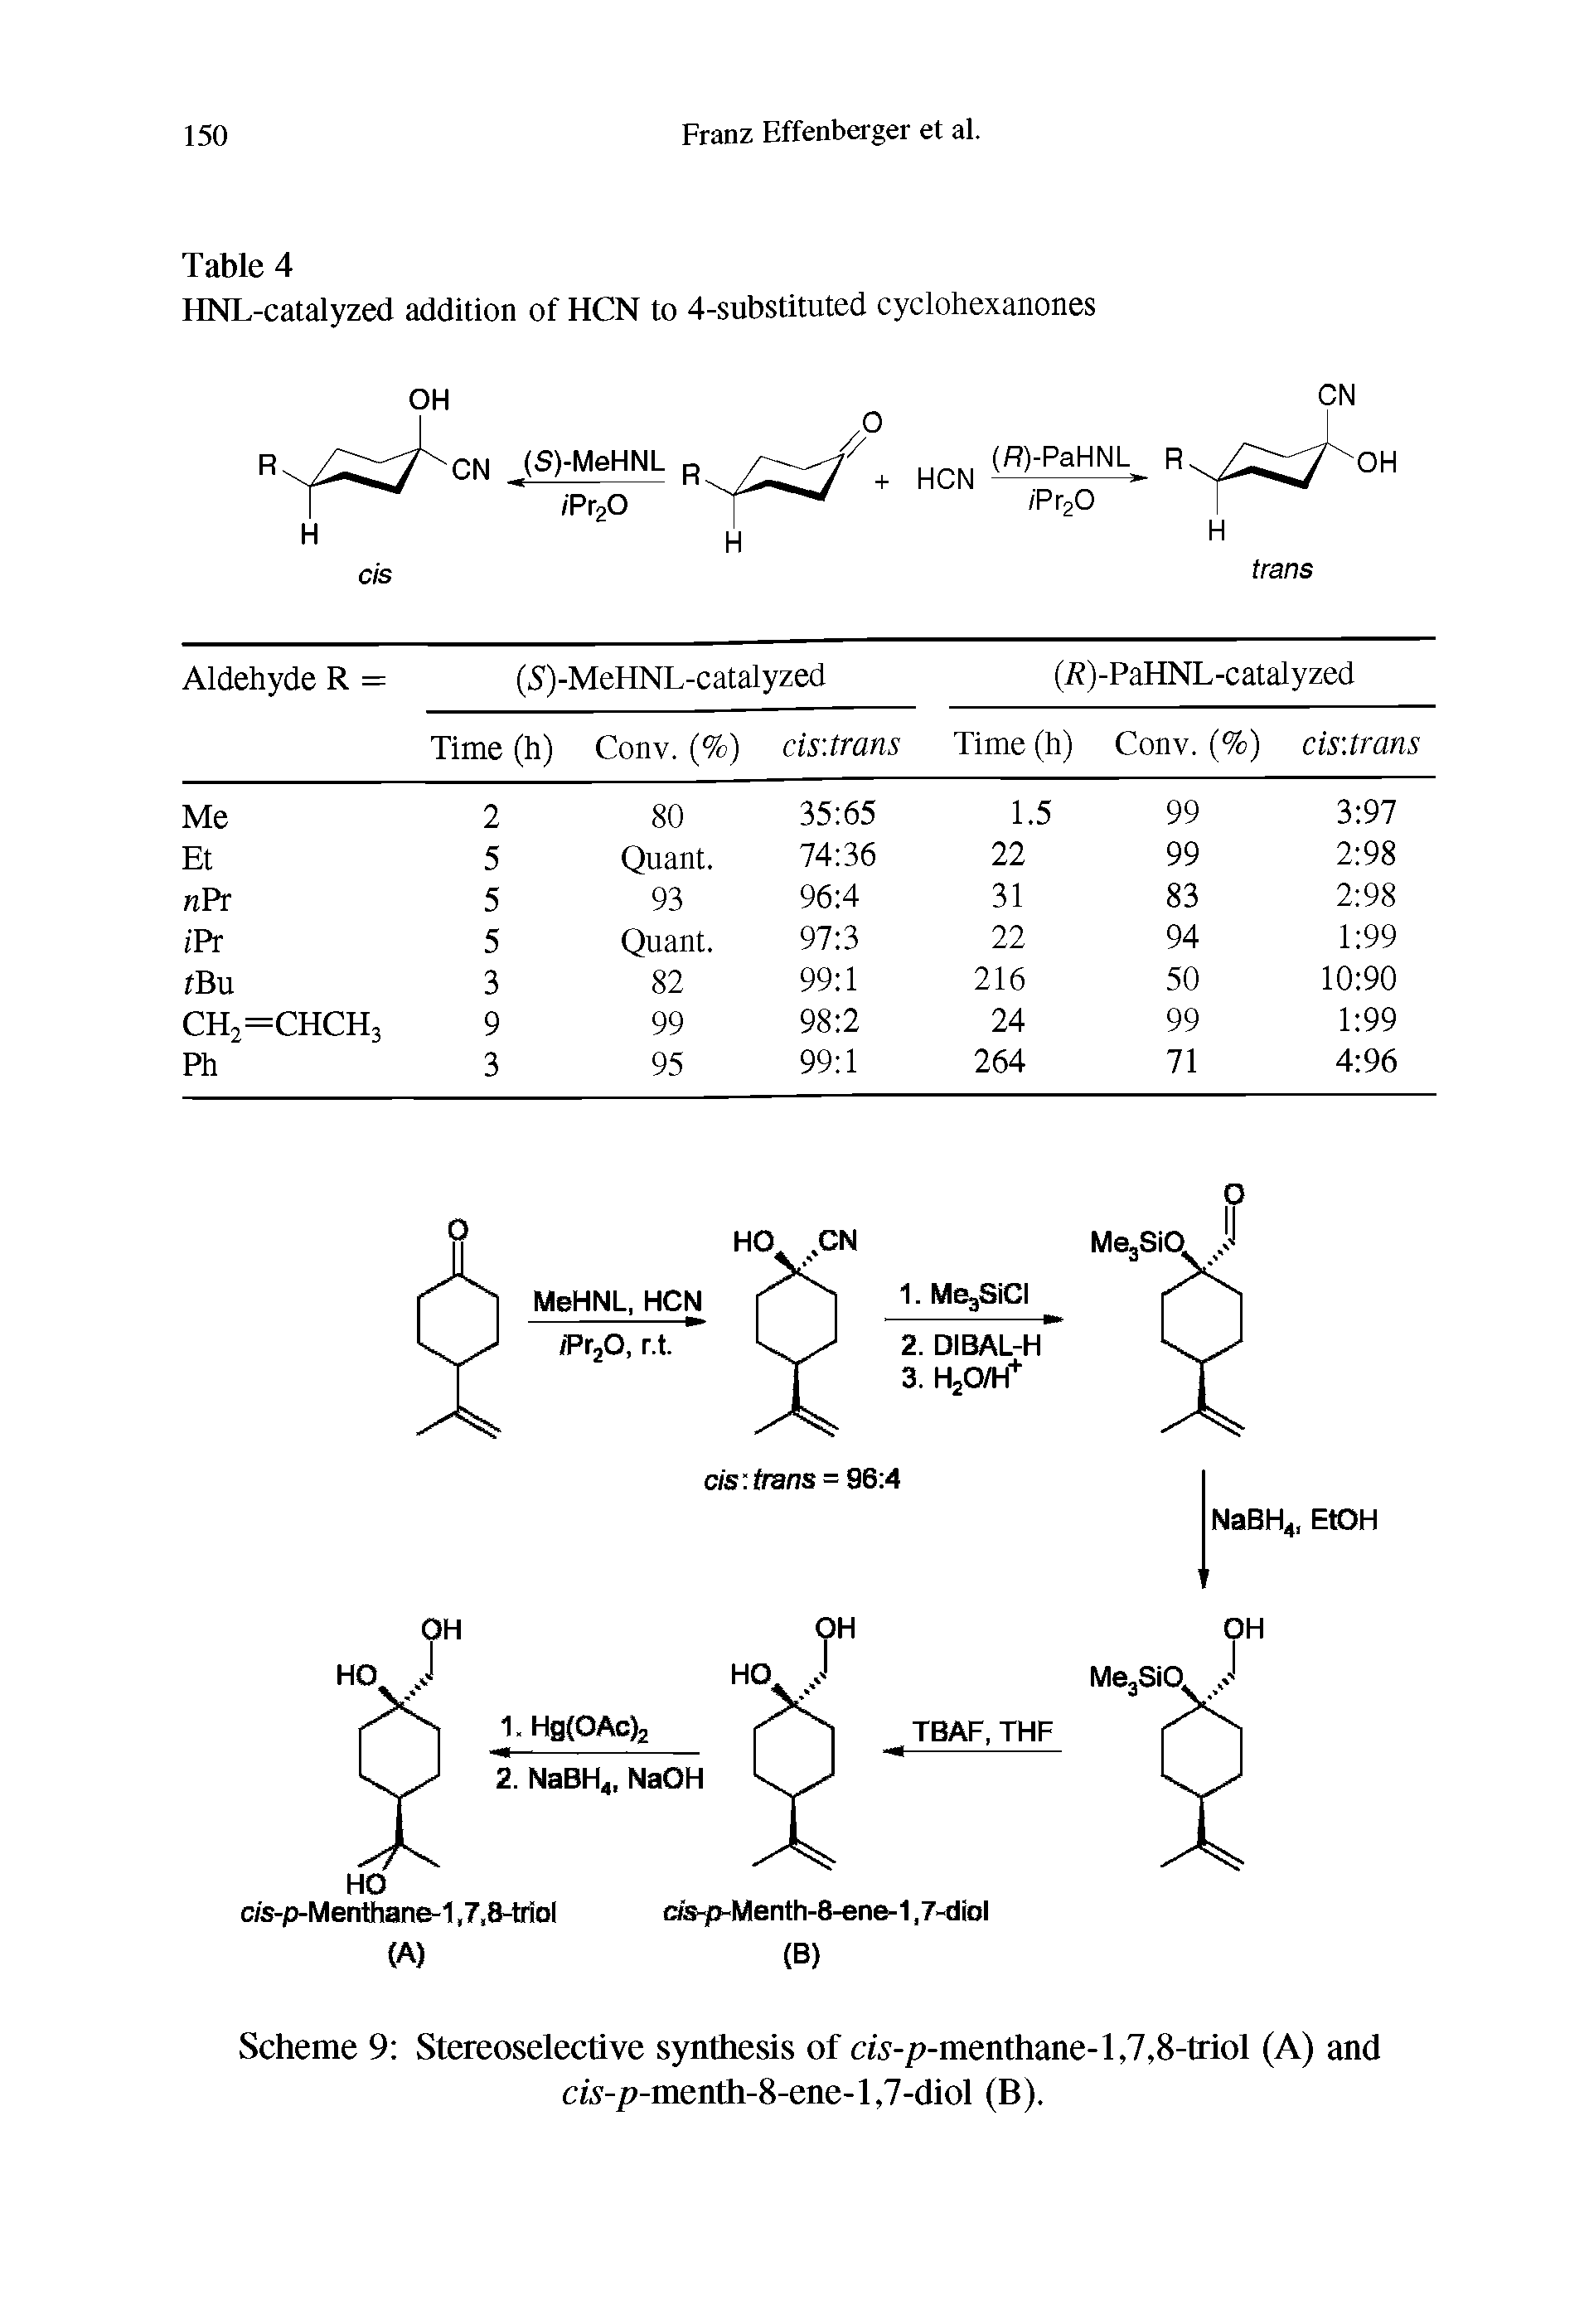 Scheme 9 Stereoselective synthesis of cw-p-menthane-l,7,8-triol (A) and cA-p-menth-8-ene-l,7-diol (B).